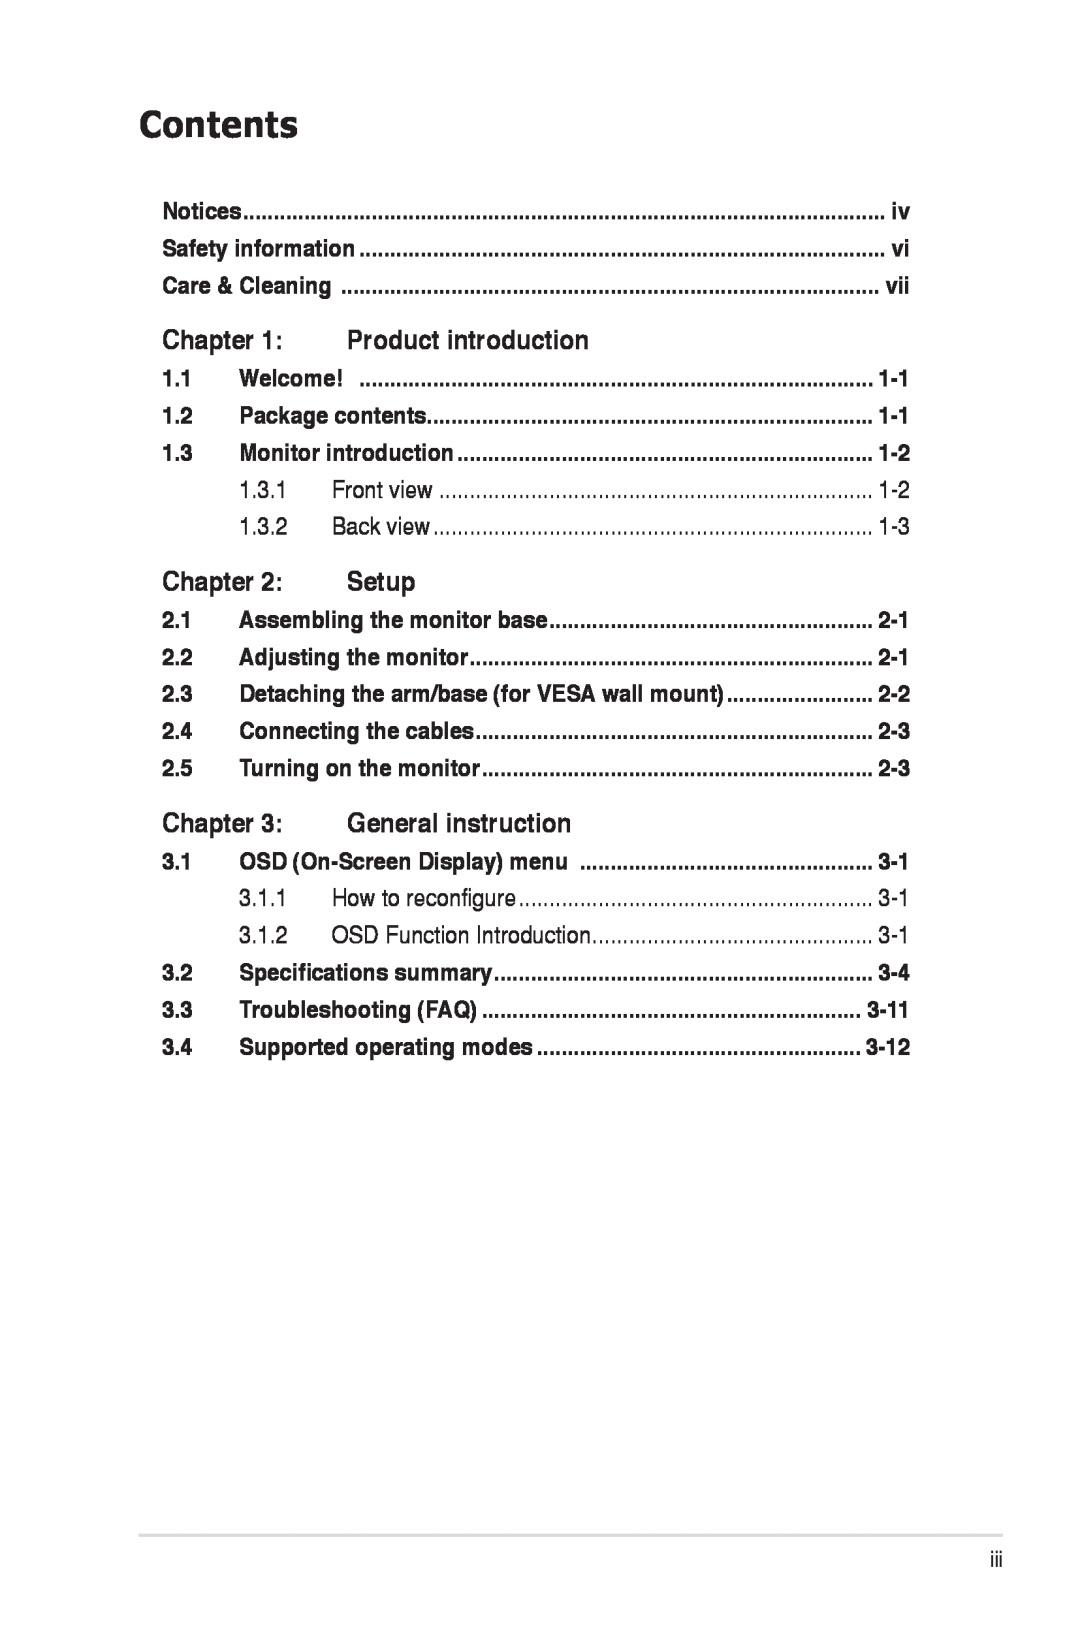 Asus VW222, VW202 manual Contents, Chapter, Product introduction, Setup, General instruction, 1.3.1, 1.3.2, 3.1.1, 3.1.2 